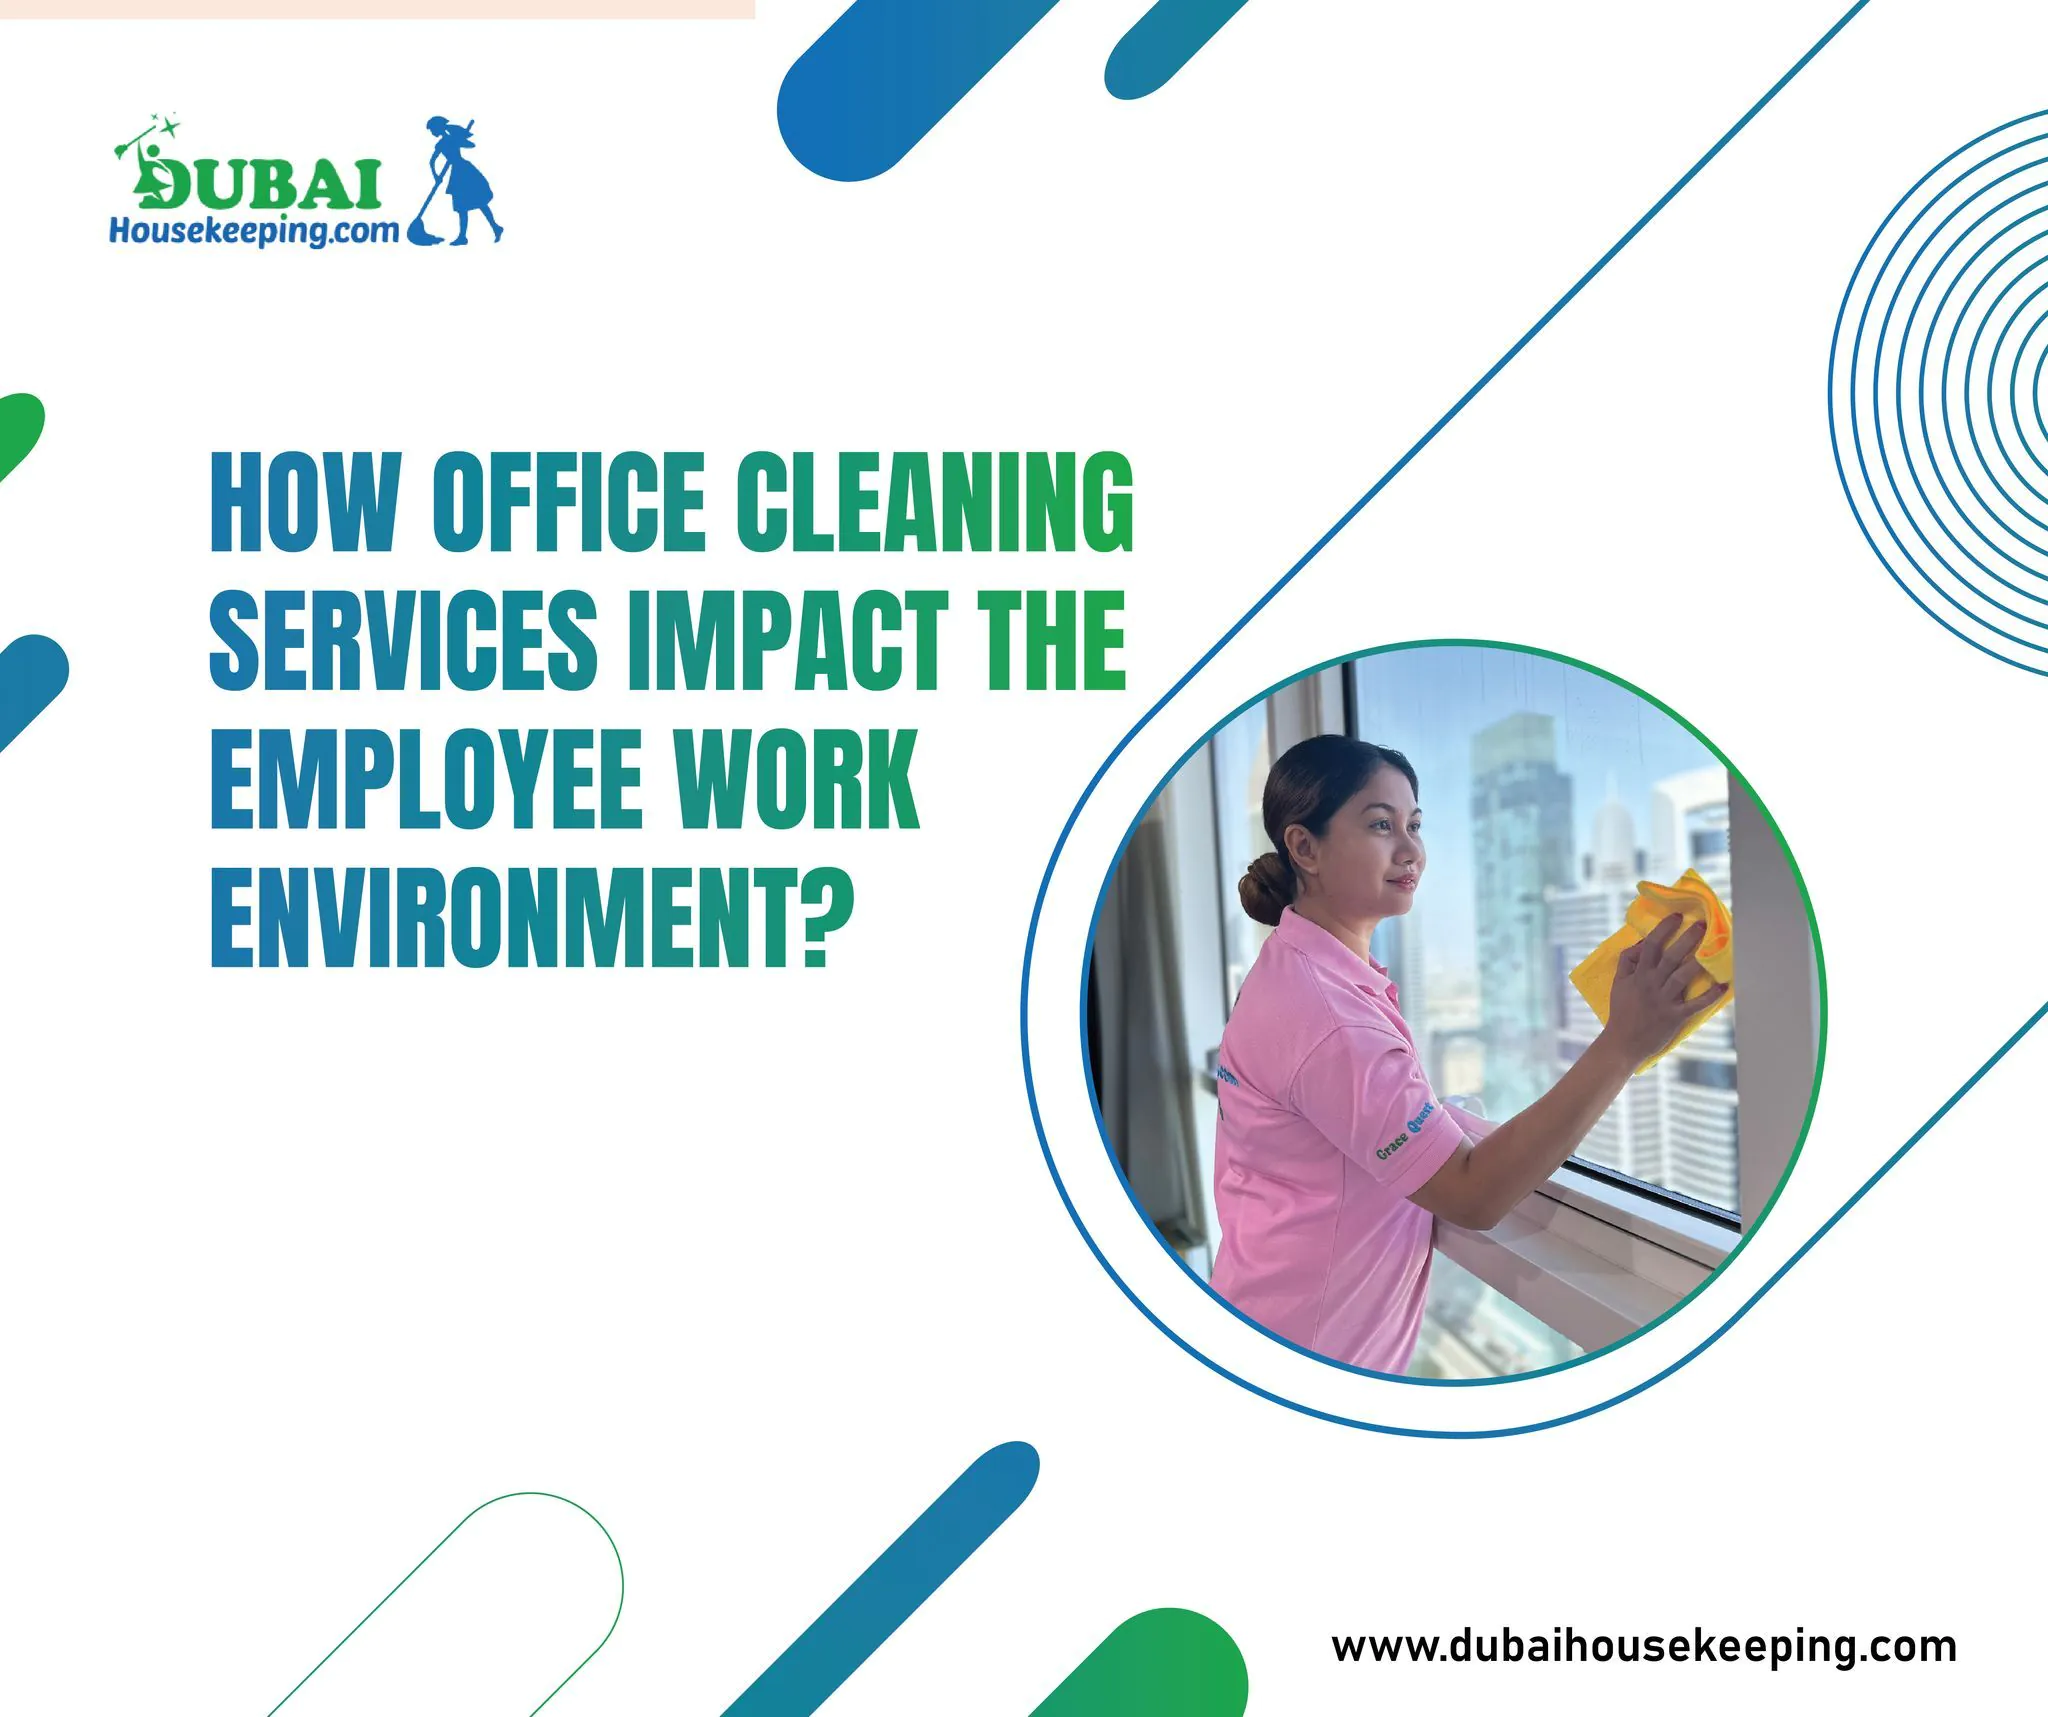 Creating a Healthy Workspace: How Office Cleaning Services Impact the Employee Work Environment